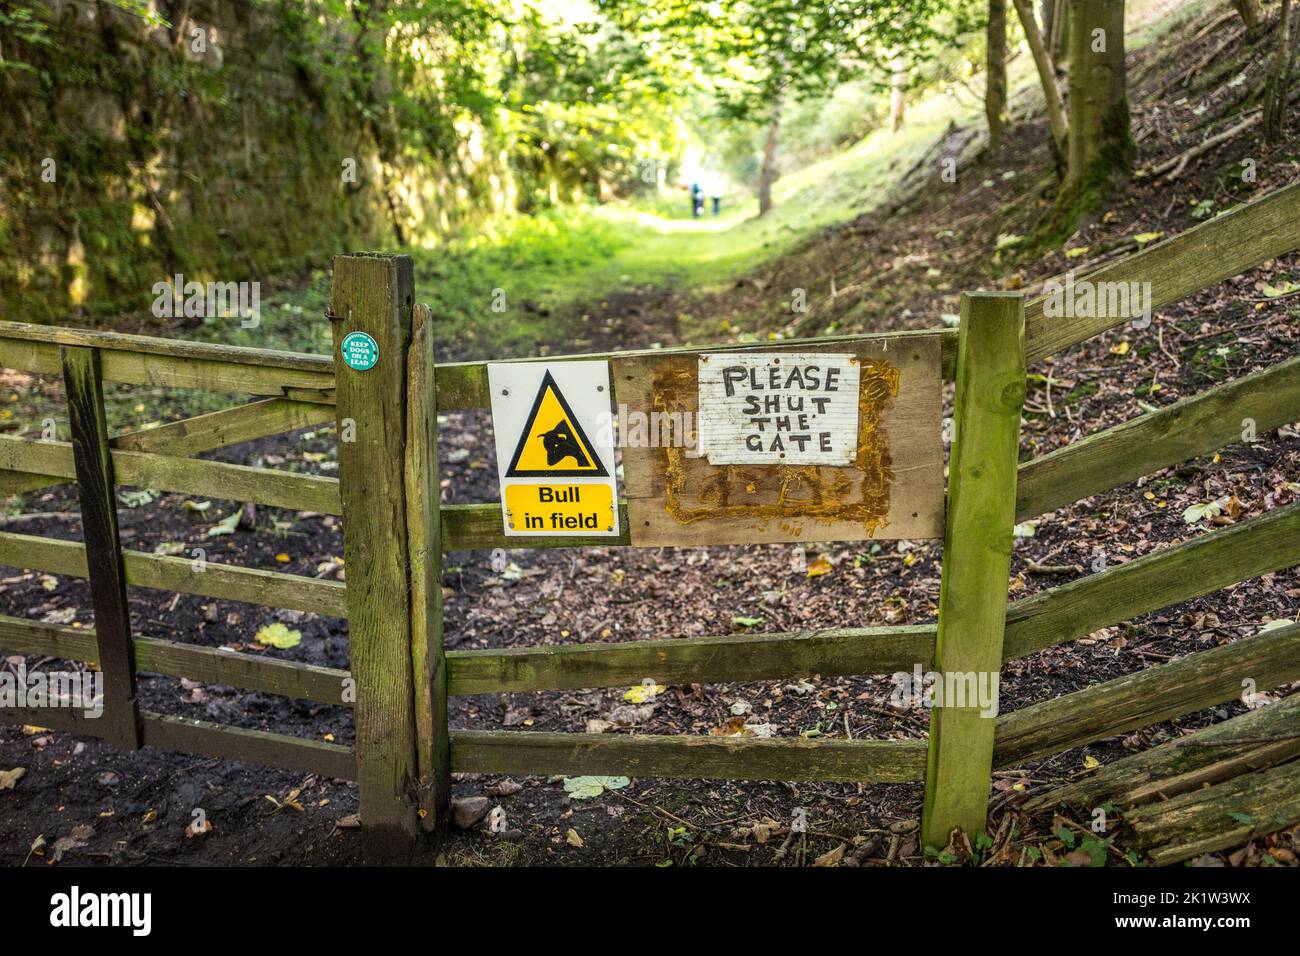 Signs and nitices, Bull in Field and Please Shut the Gate attached to a wooden fence along a public footpath. Stock Photo